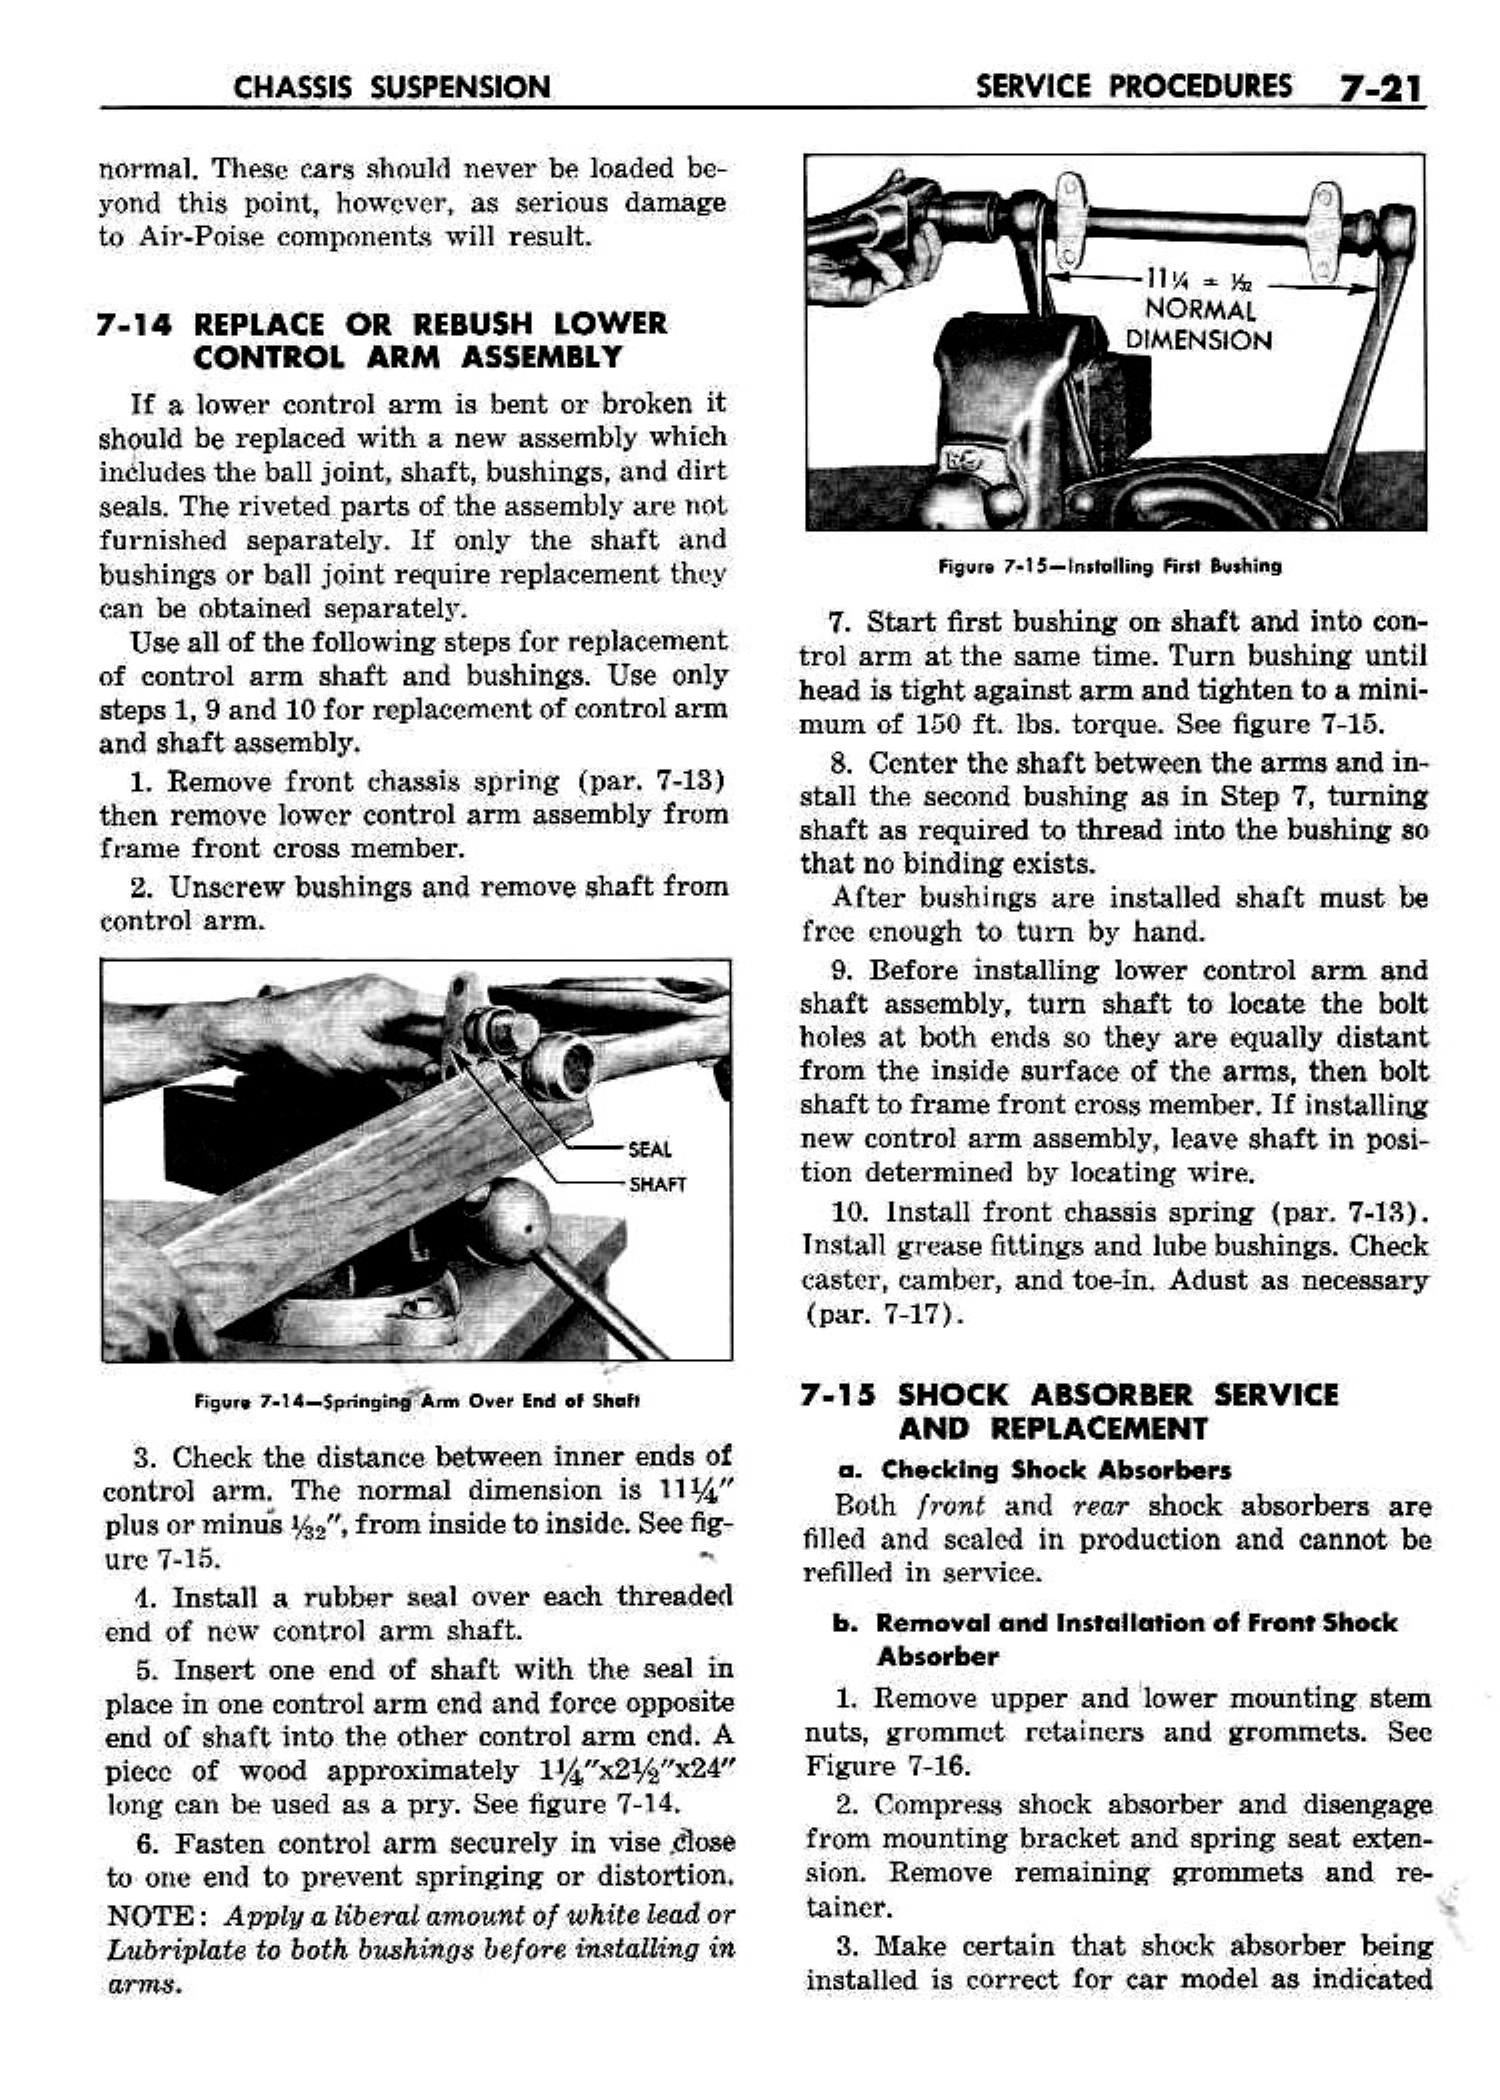 n_08 1958 Buick Shop Manual - Chassis Suspension_21.jpg